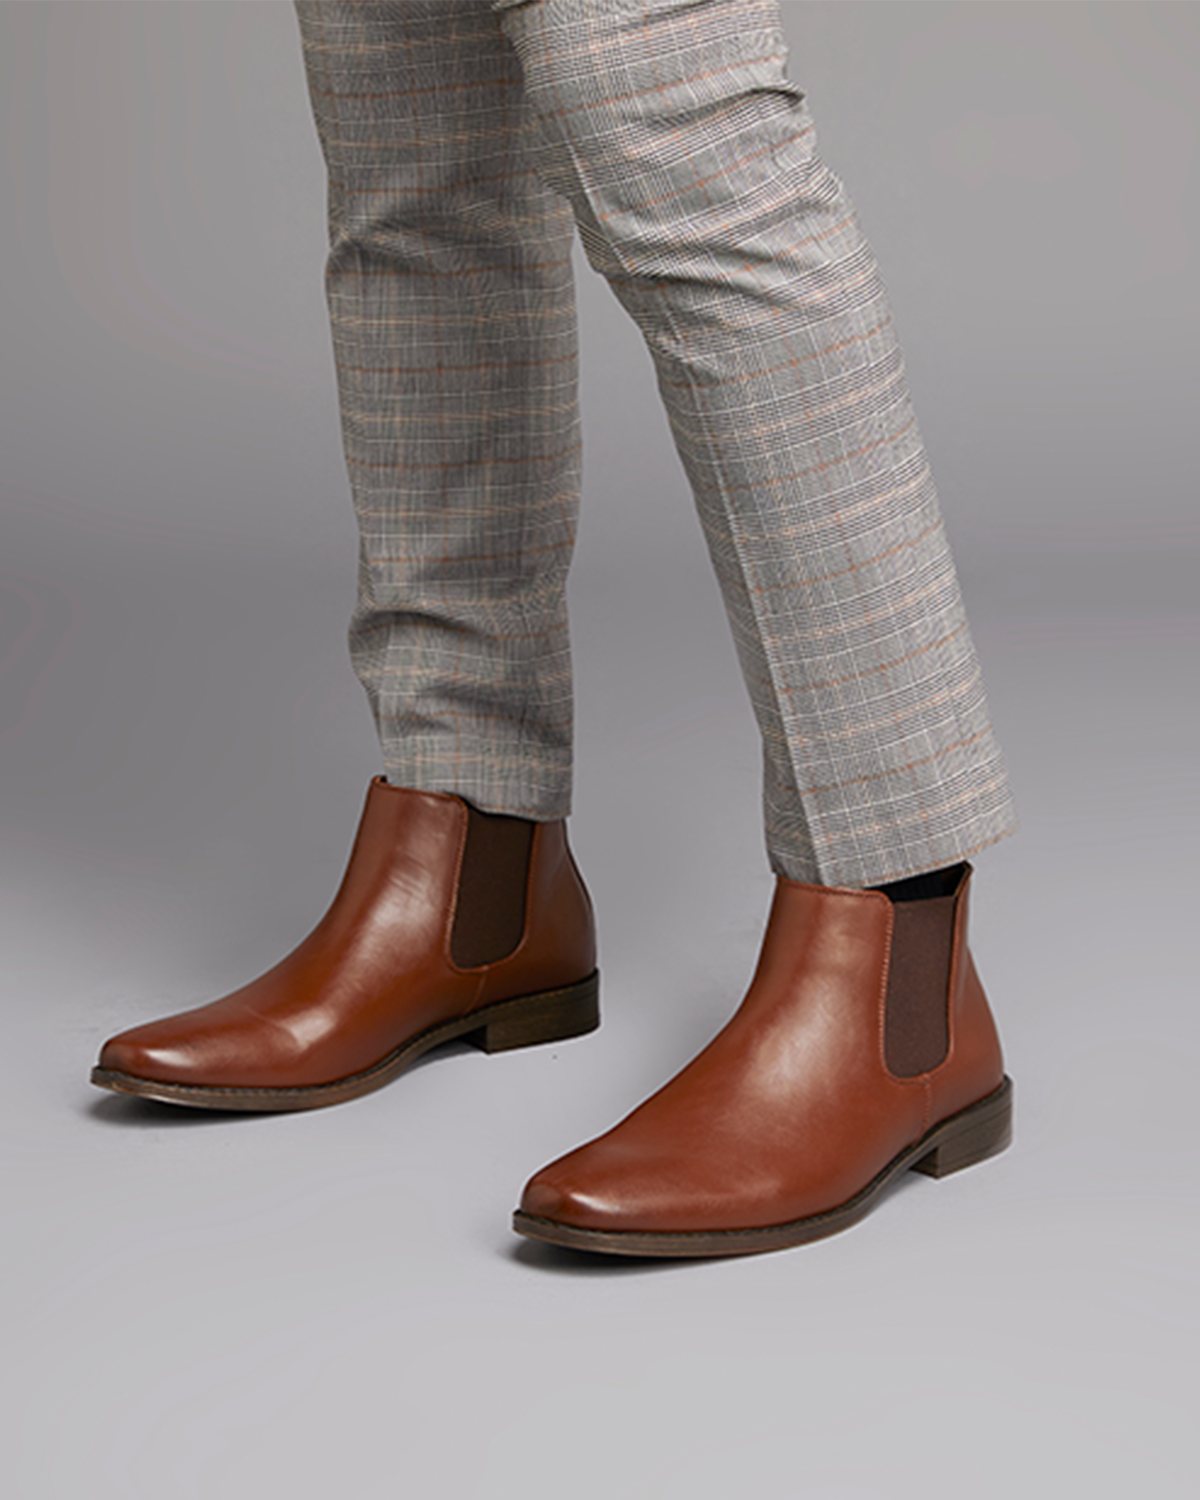 Uncut Shoes Canterbury Brown | Men's Boot | Chelsea | Dress | Pull On